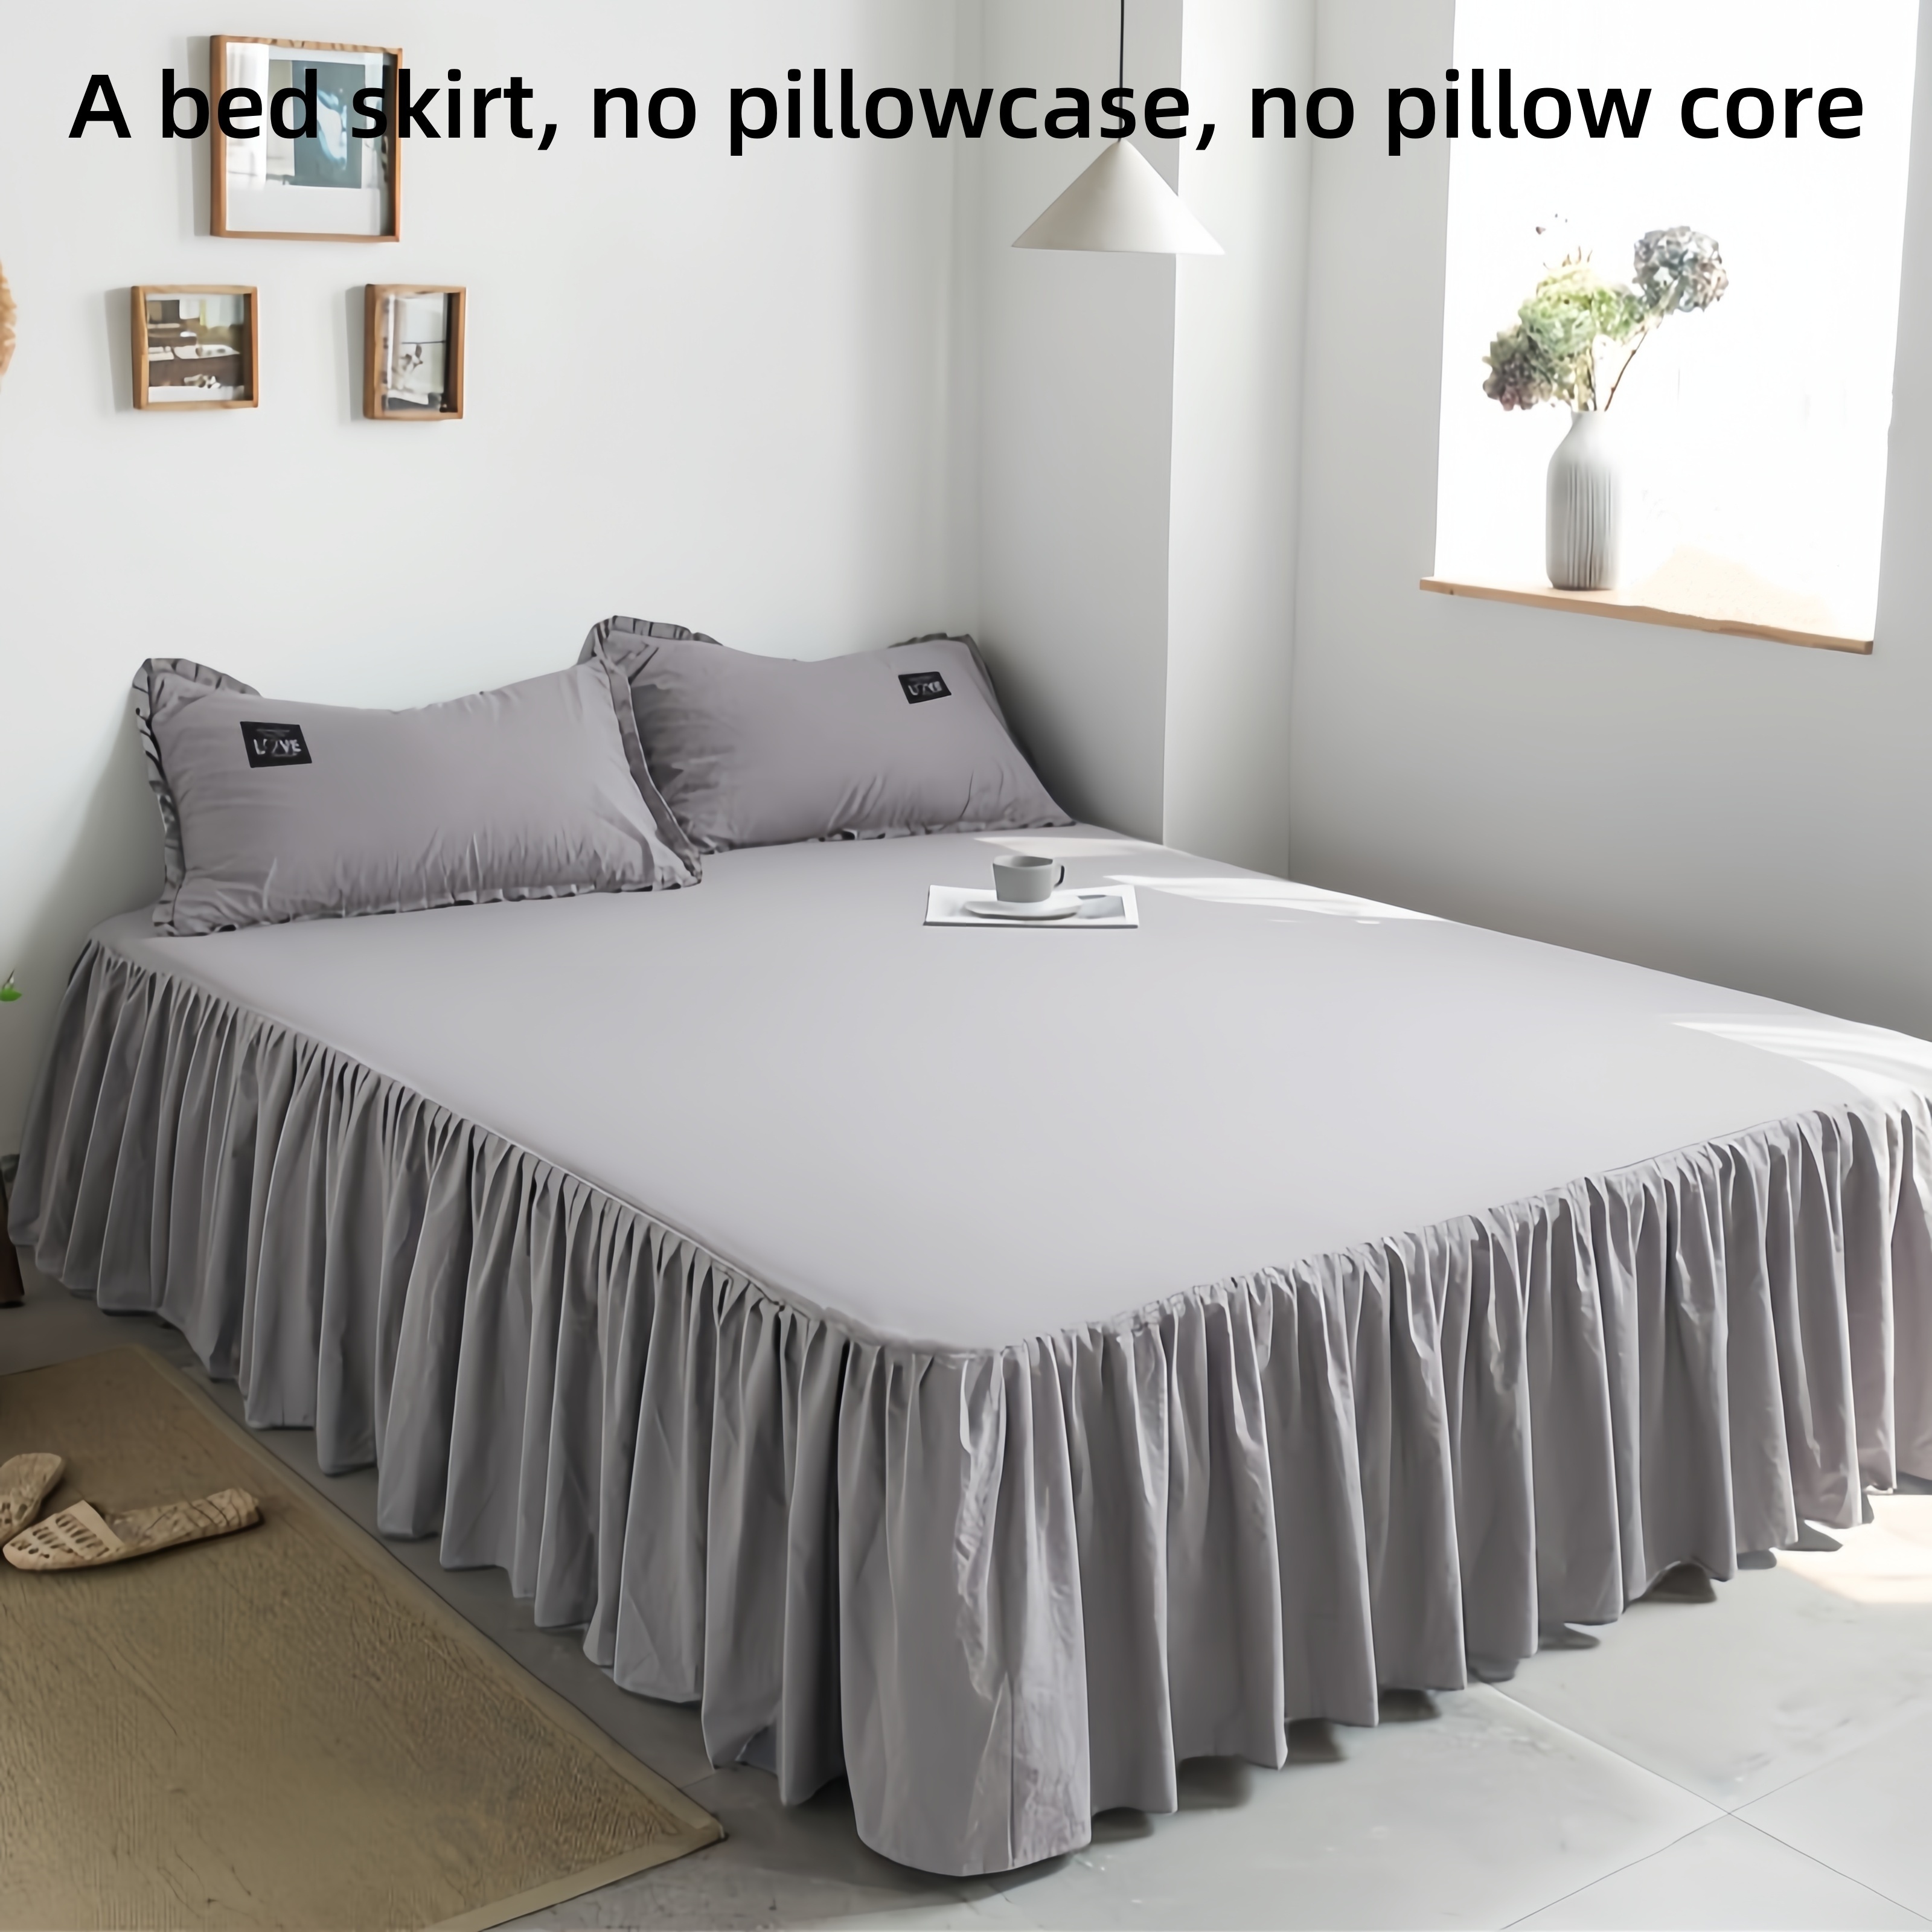 1pc Bed Skirt Wrap Around Elastic Adjustable Bed Skirt Warm Soft Cozy For  Bedroom Living Room, High-quality & Affordable